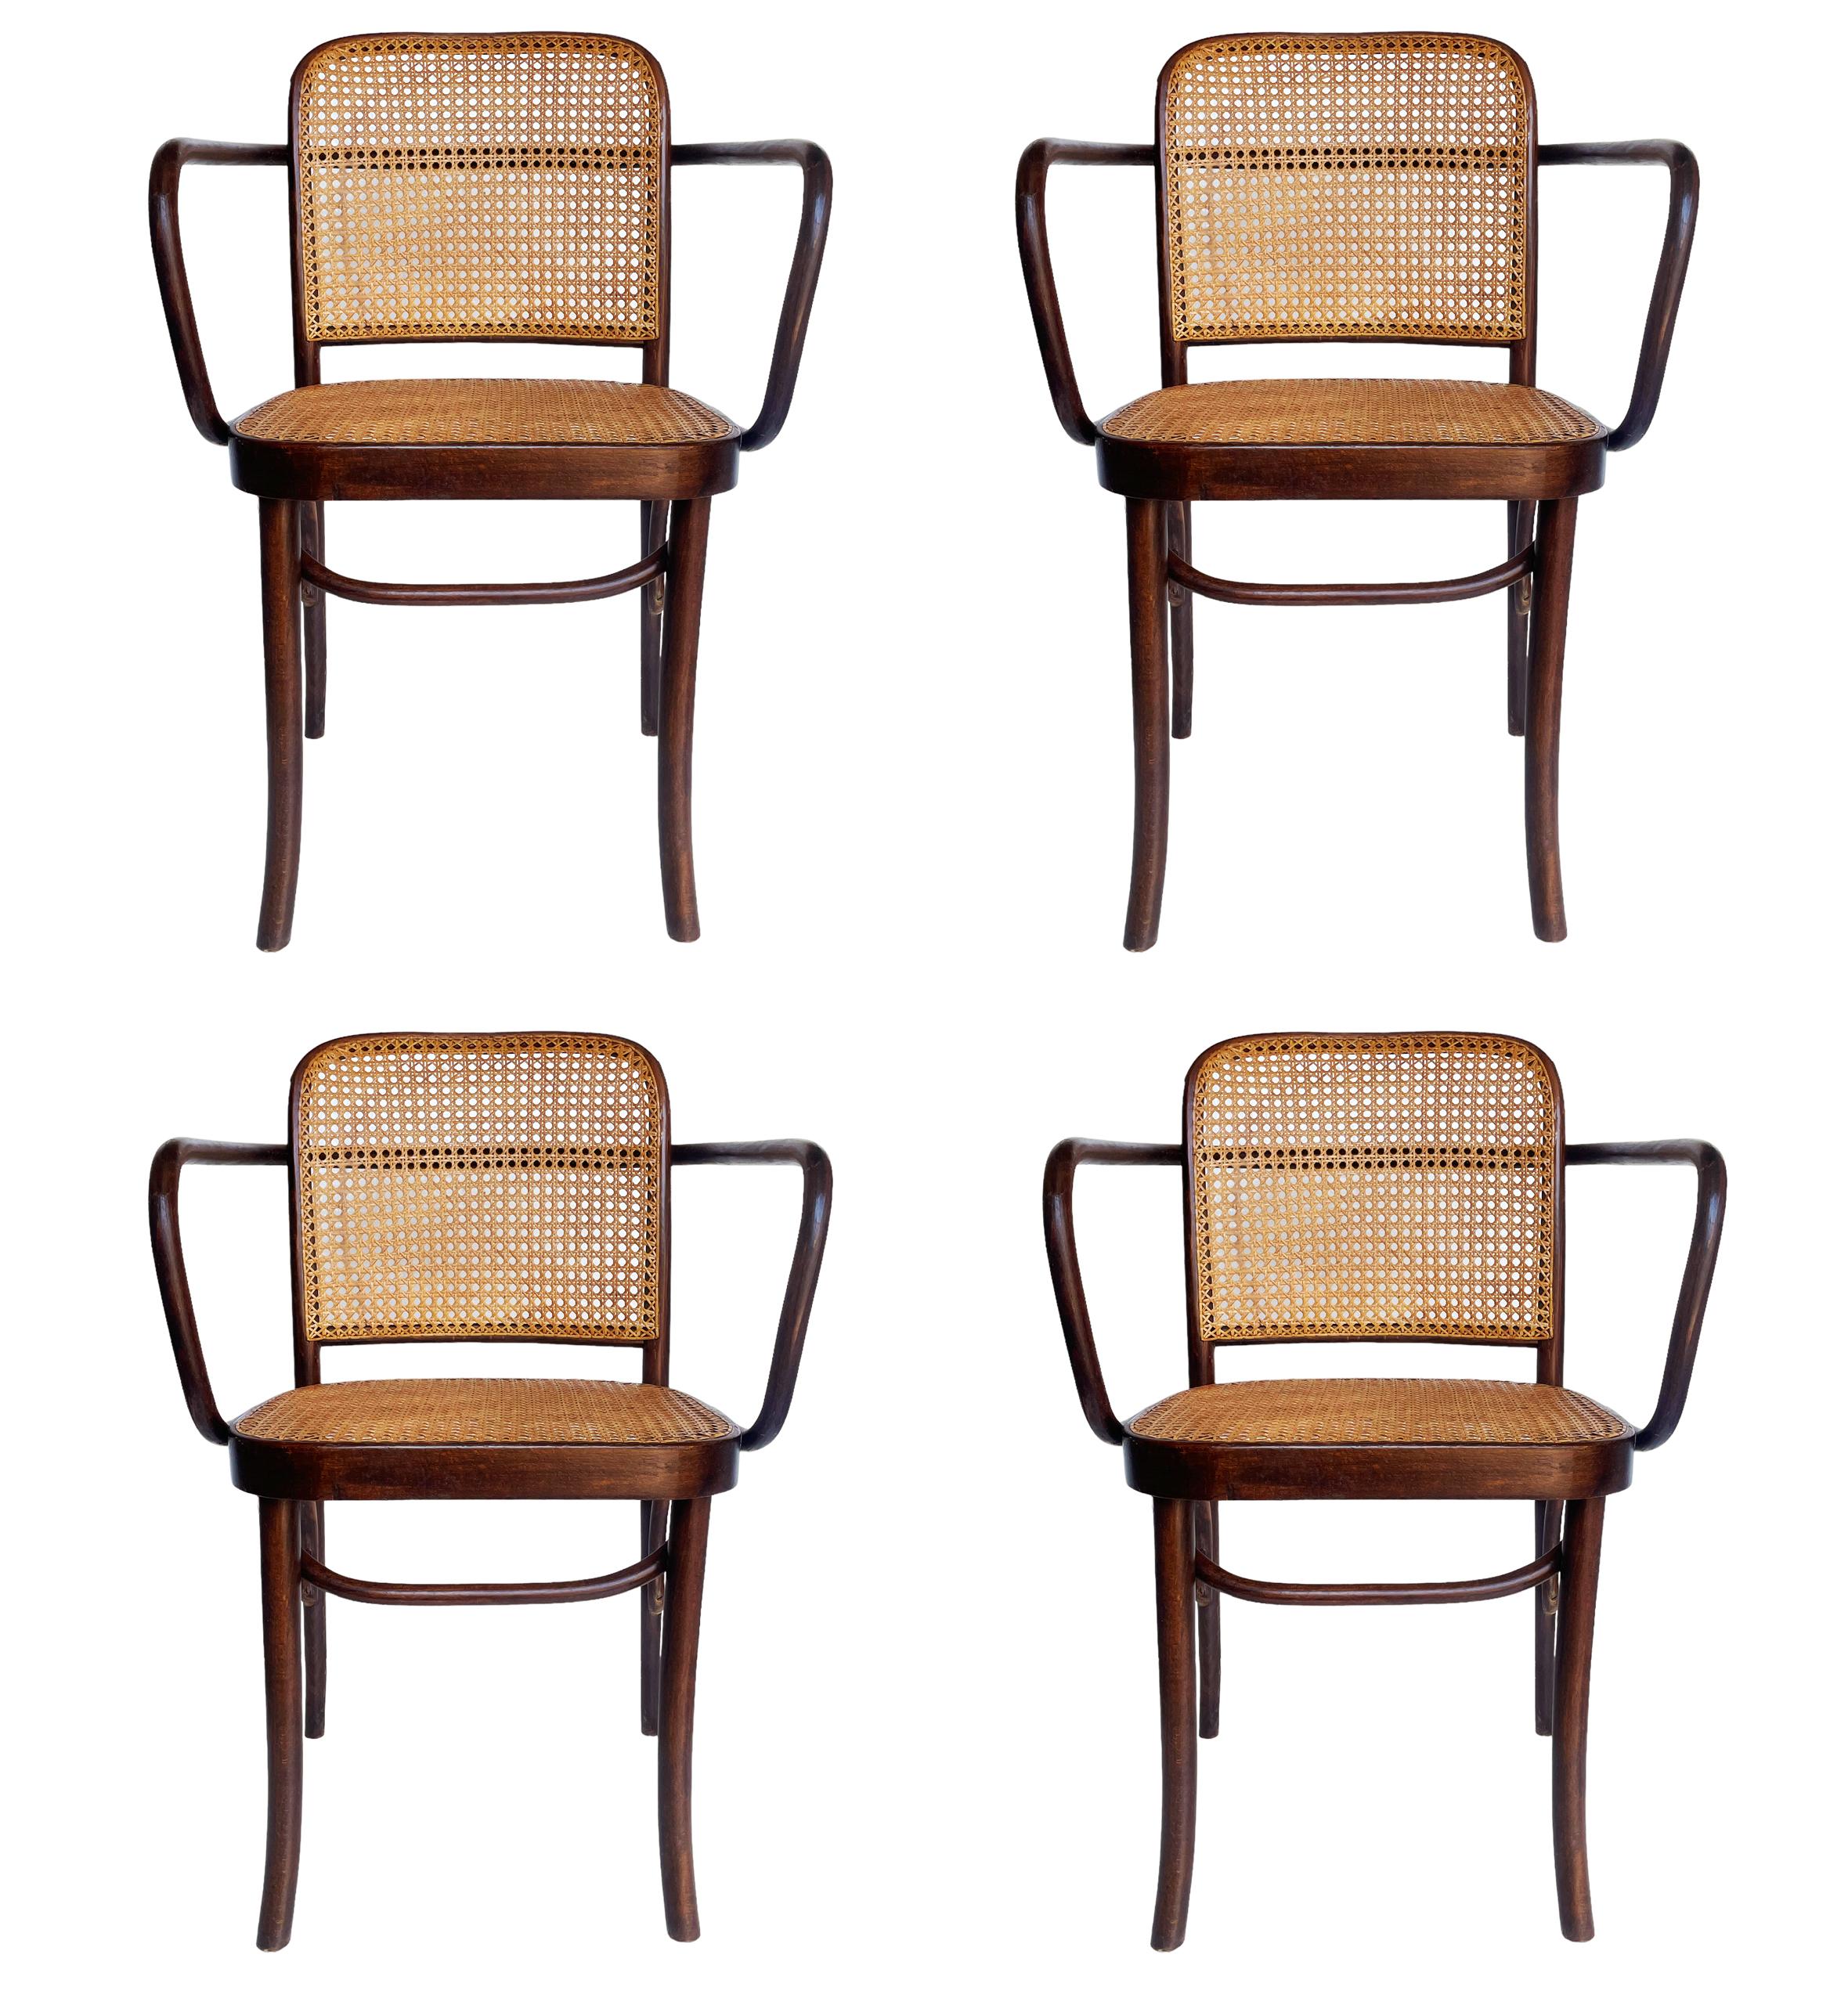 Set of 4 Mid-Century Modern Dining Prague Chairs by Josef Hoffmann Cane & Wood For Sale 1